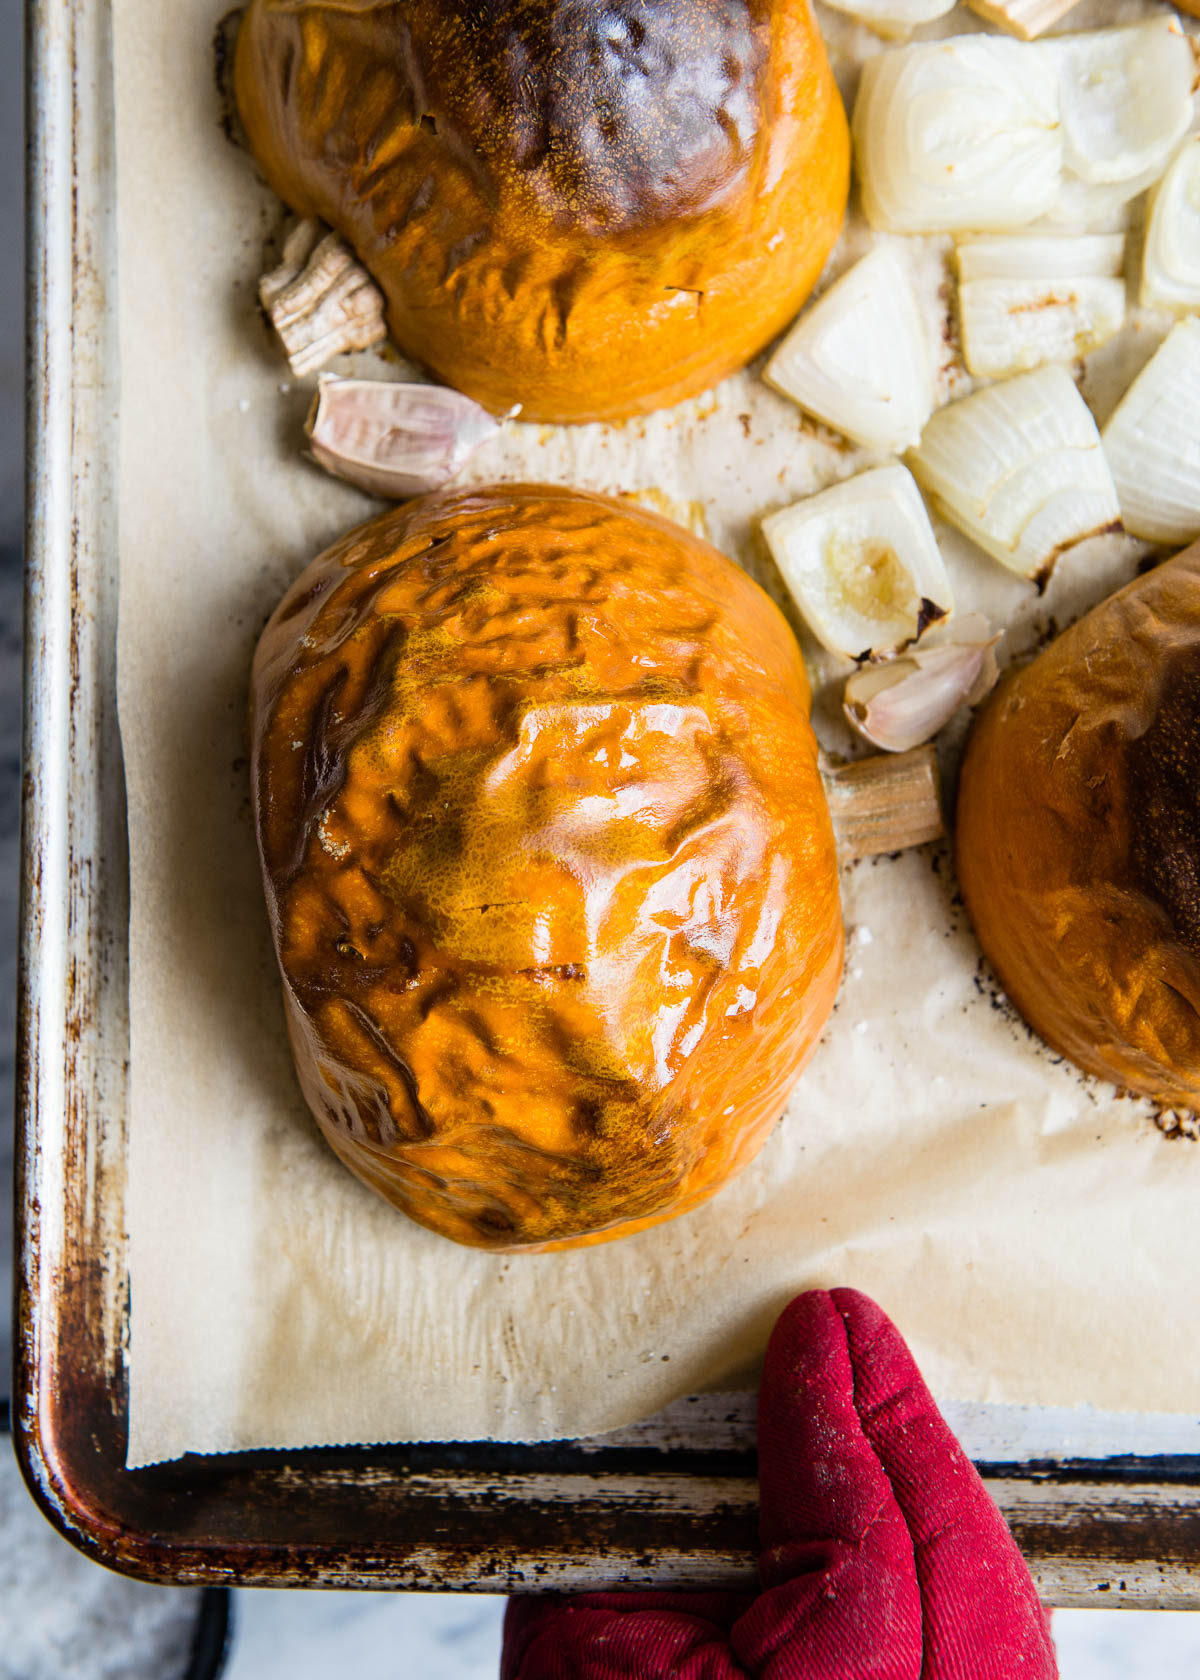 taking roasted pumpkins and onions out of the oven on a baking tray.